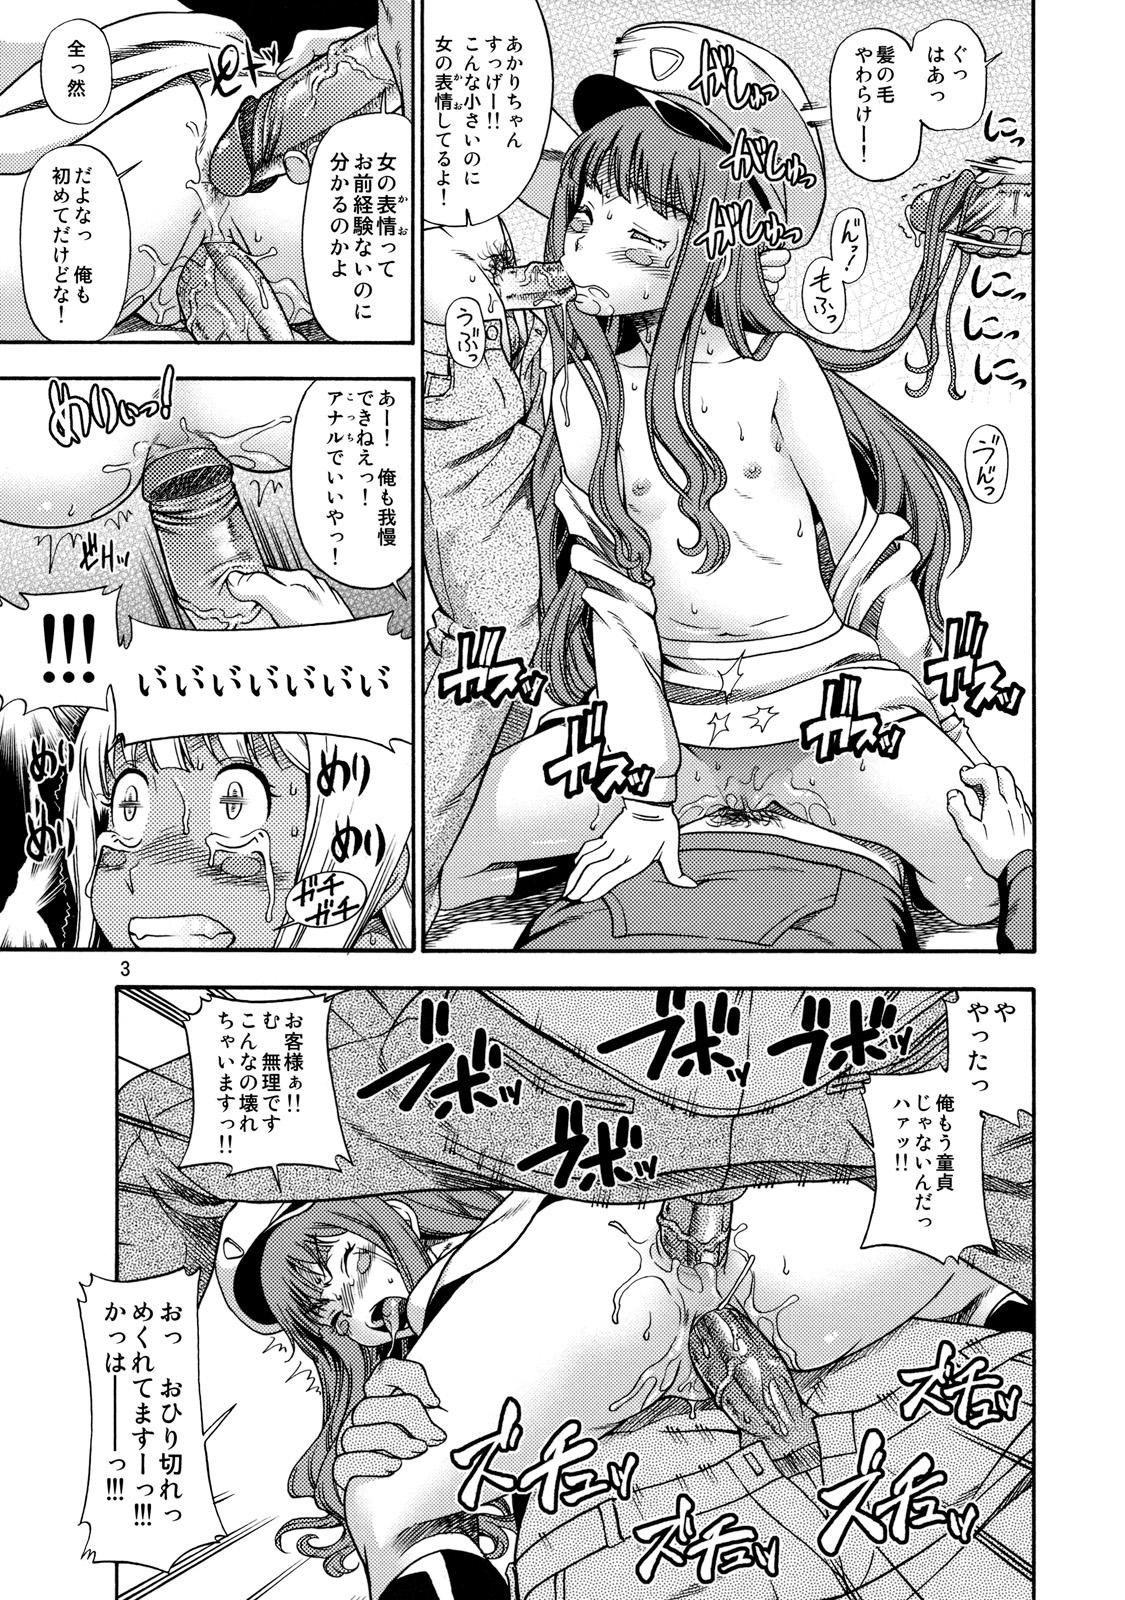 Reverse Cowgirl Miracle Dansei Senyou Train - Miracle train Sex Party - Page 3